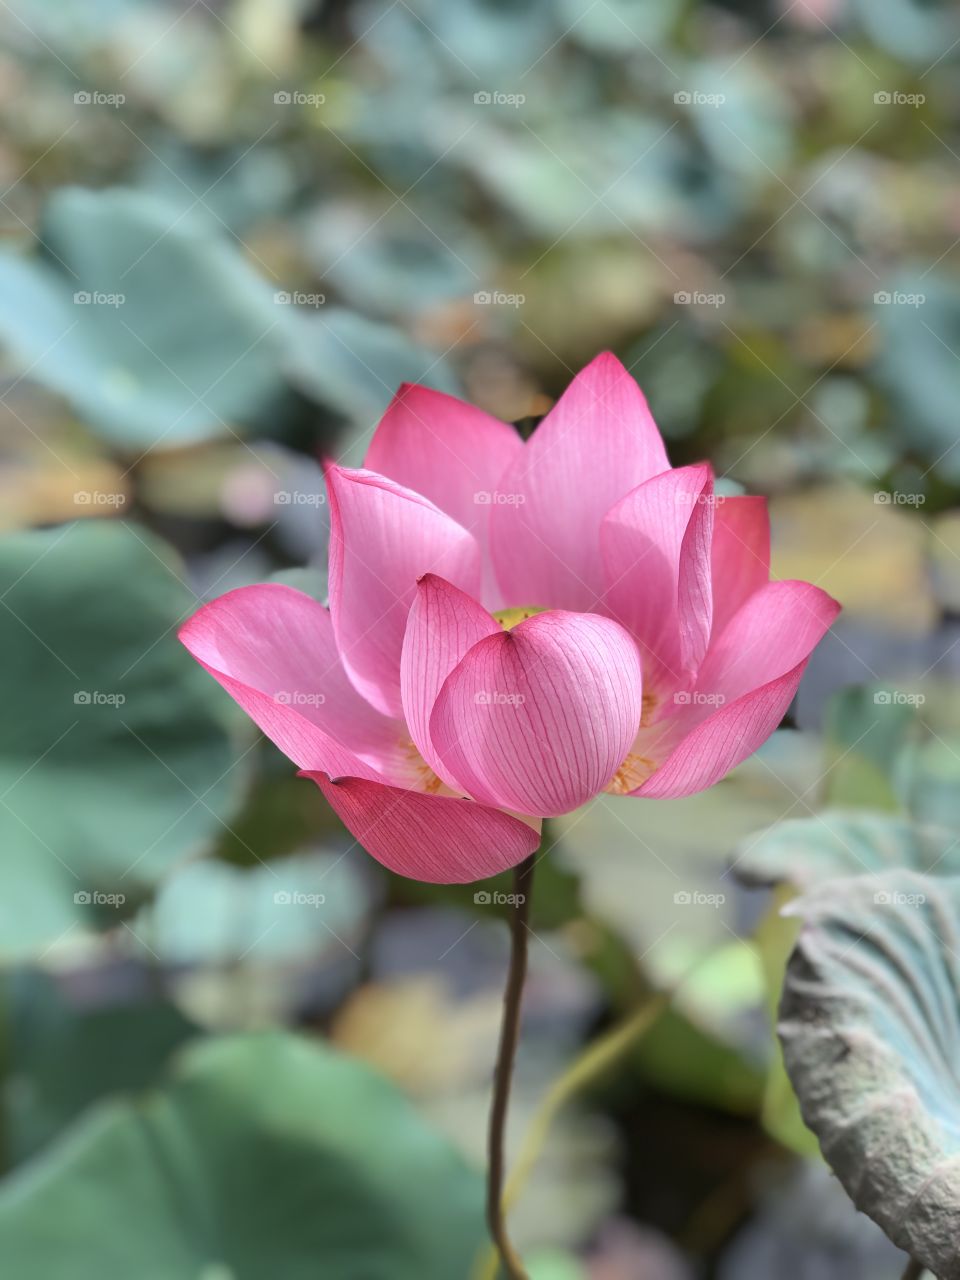 Single lotus flower in a pond 